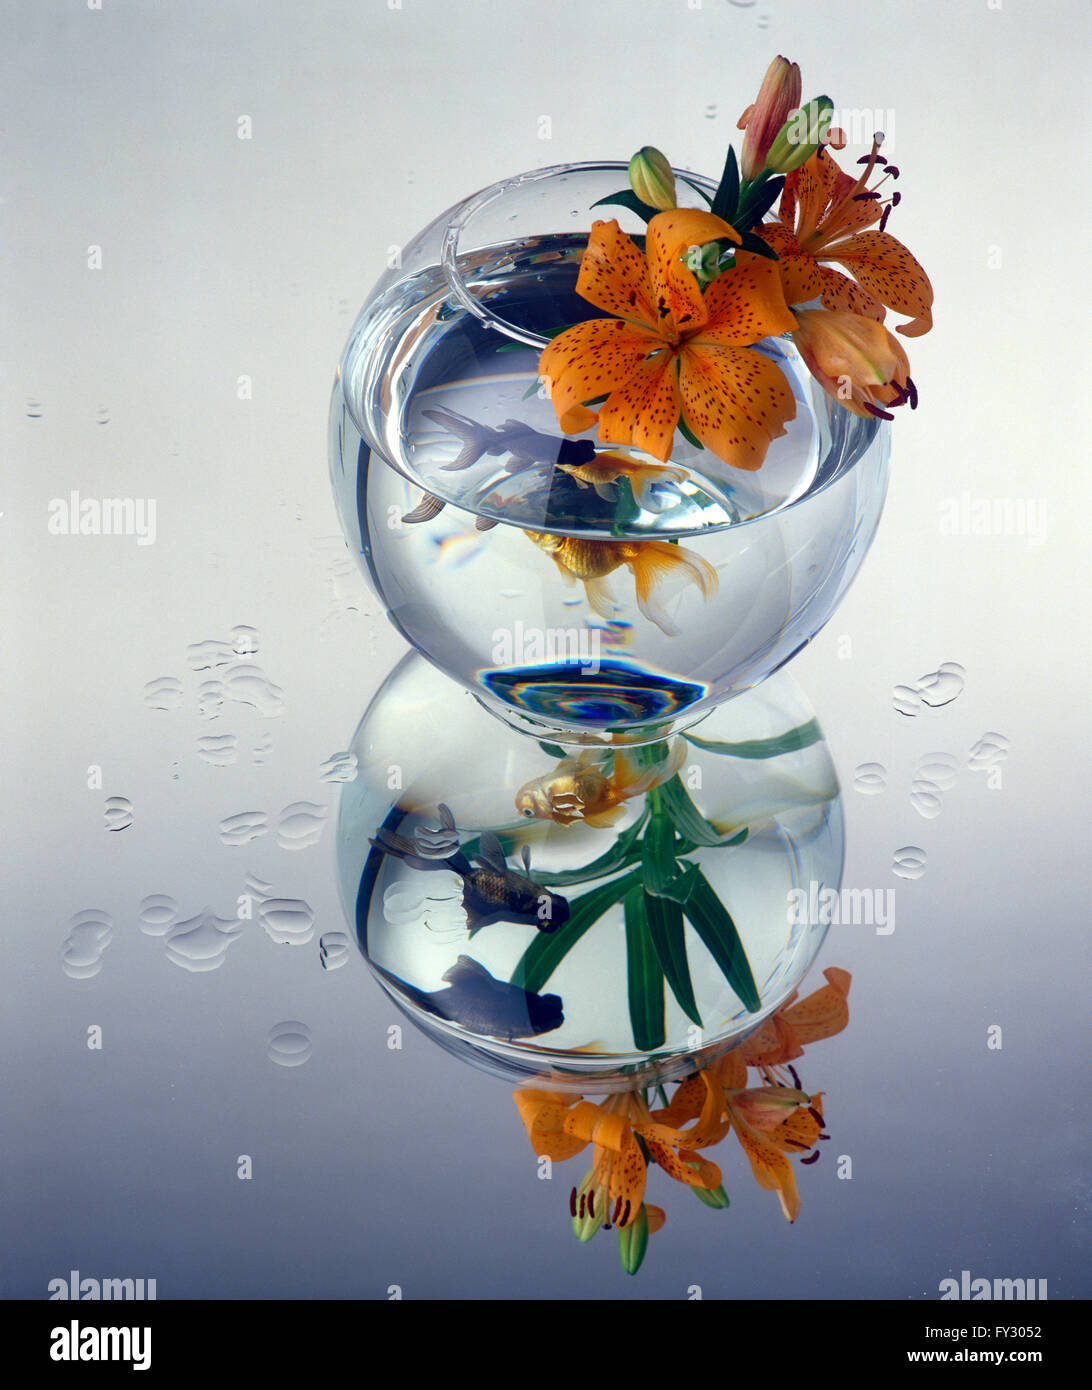 A close-up of a bowl containing a Goldfish and orange flowers, inside. Stock Photo